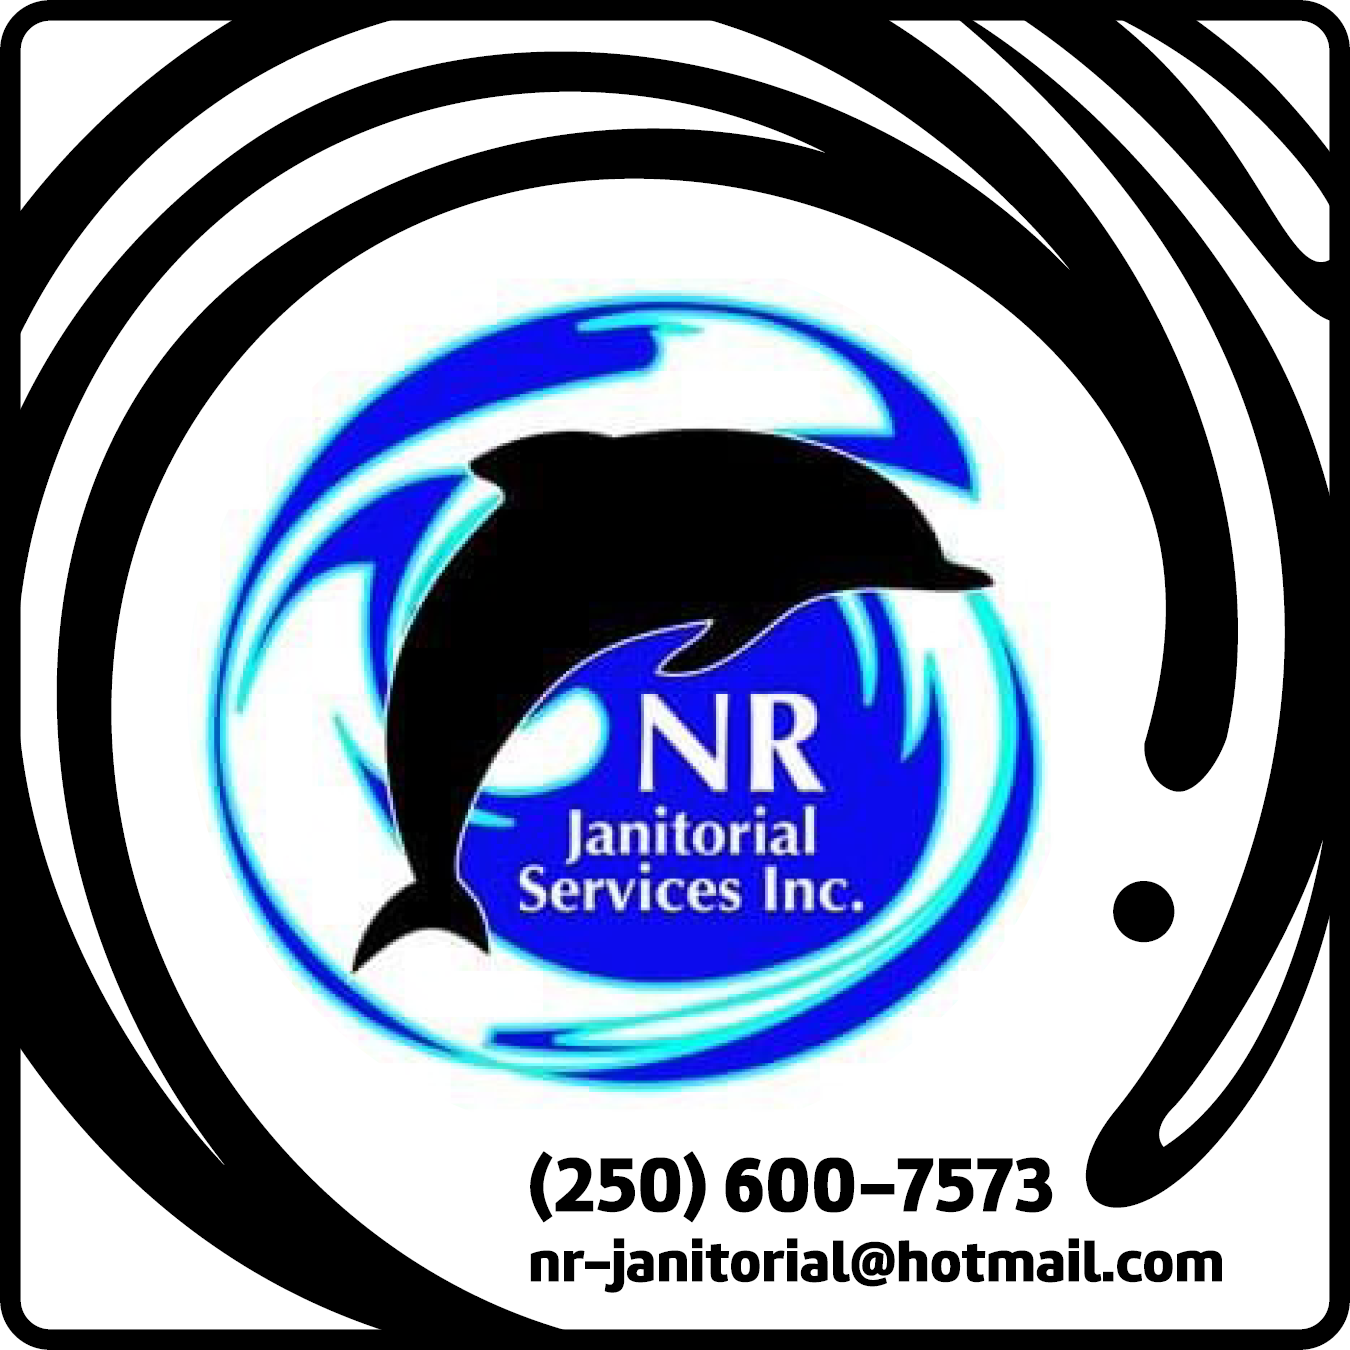 NR-Janitorial Services Inc